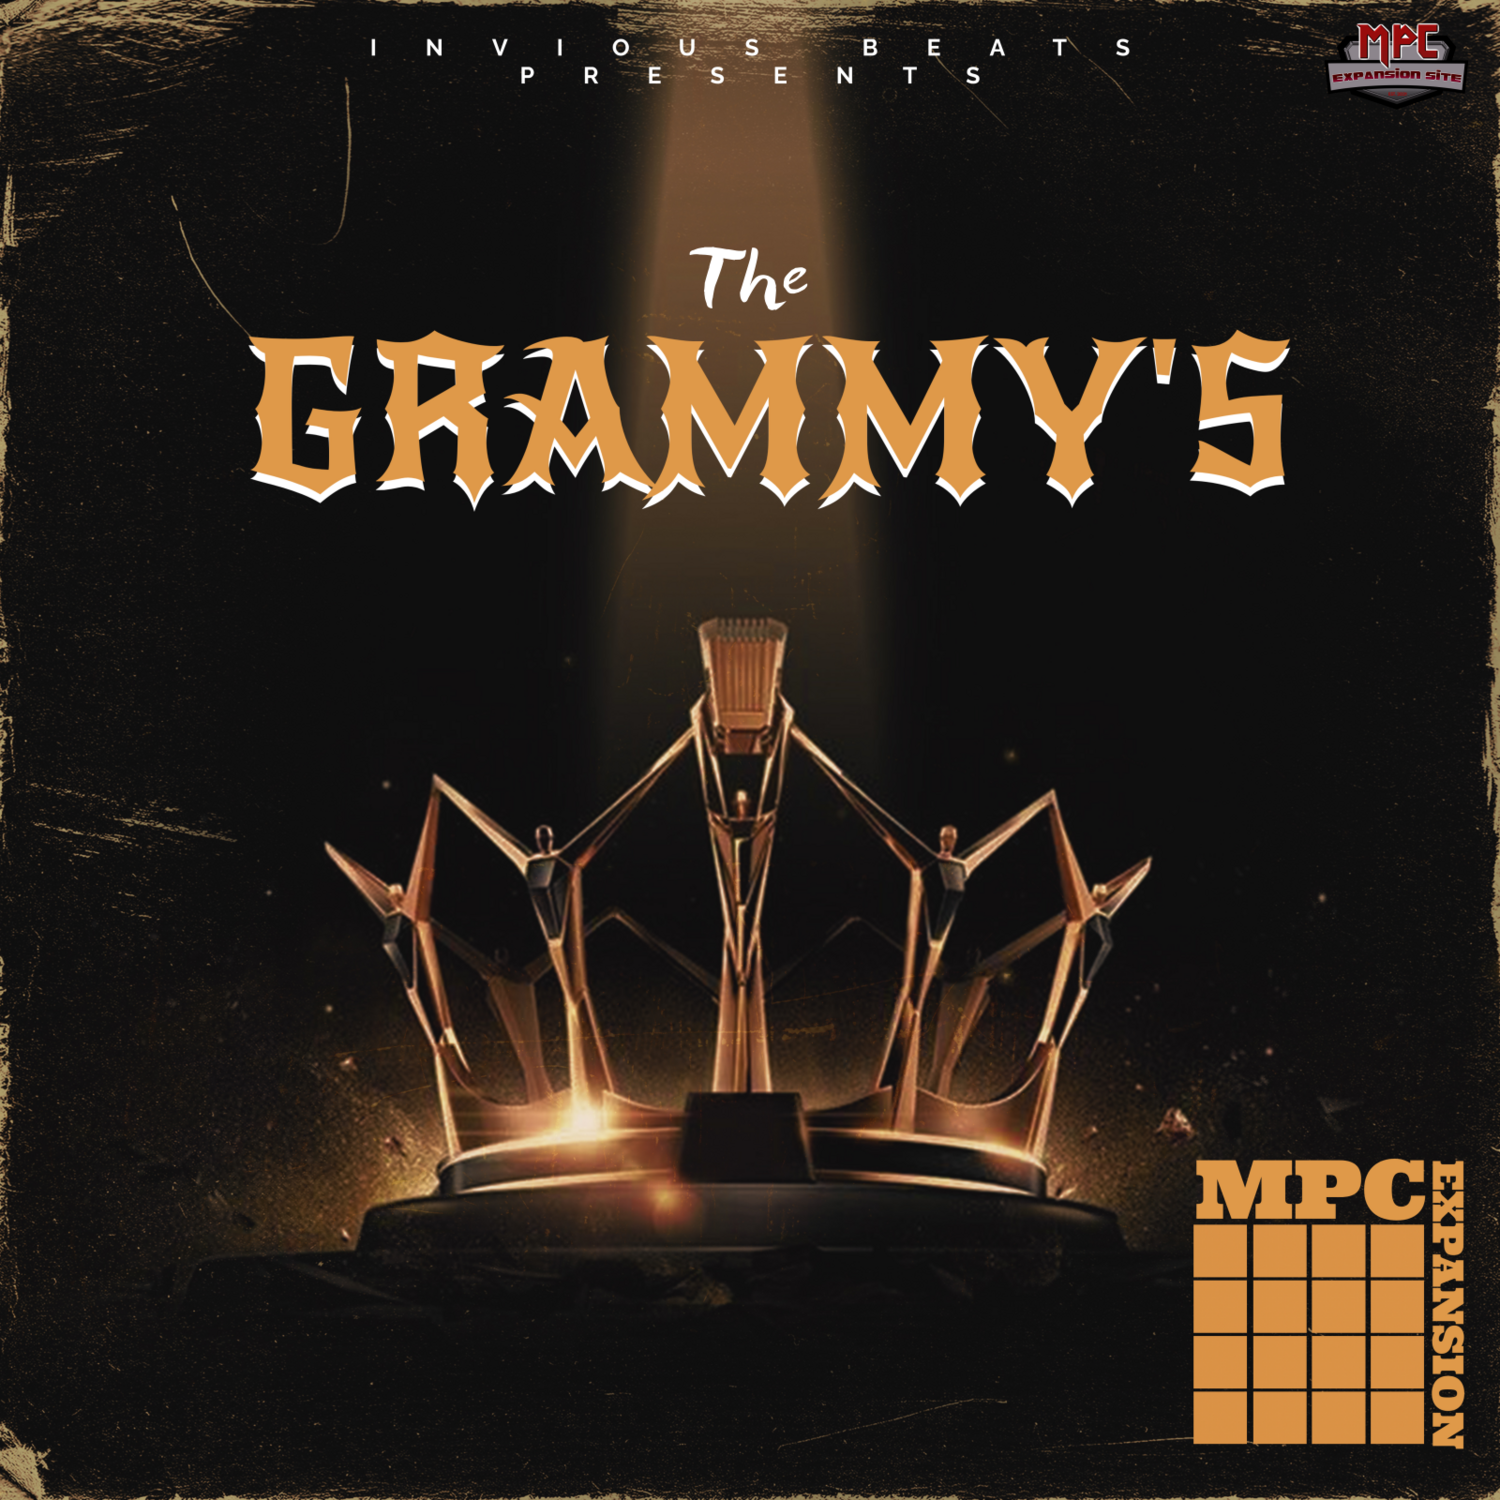 MPC EXPANSION 'THE GRAMMY'S' by INVIOUS